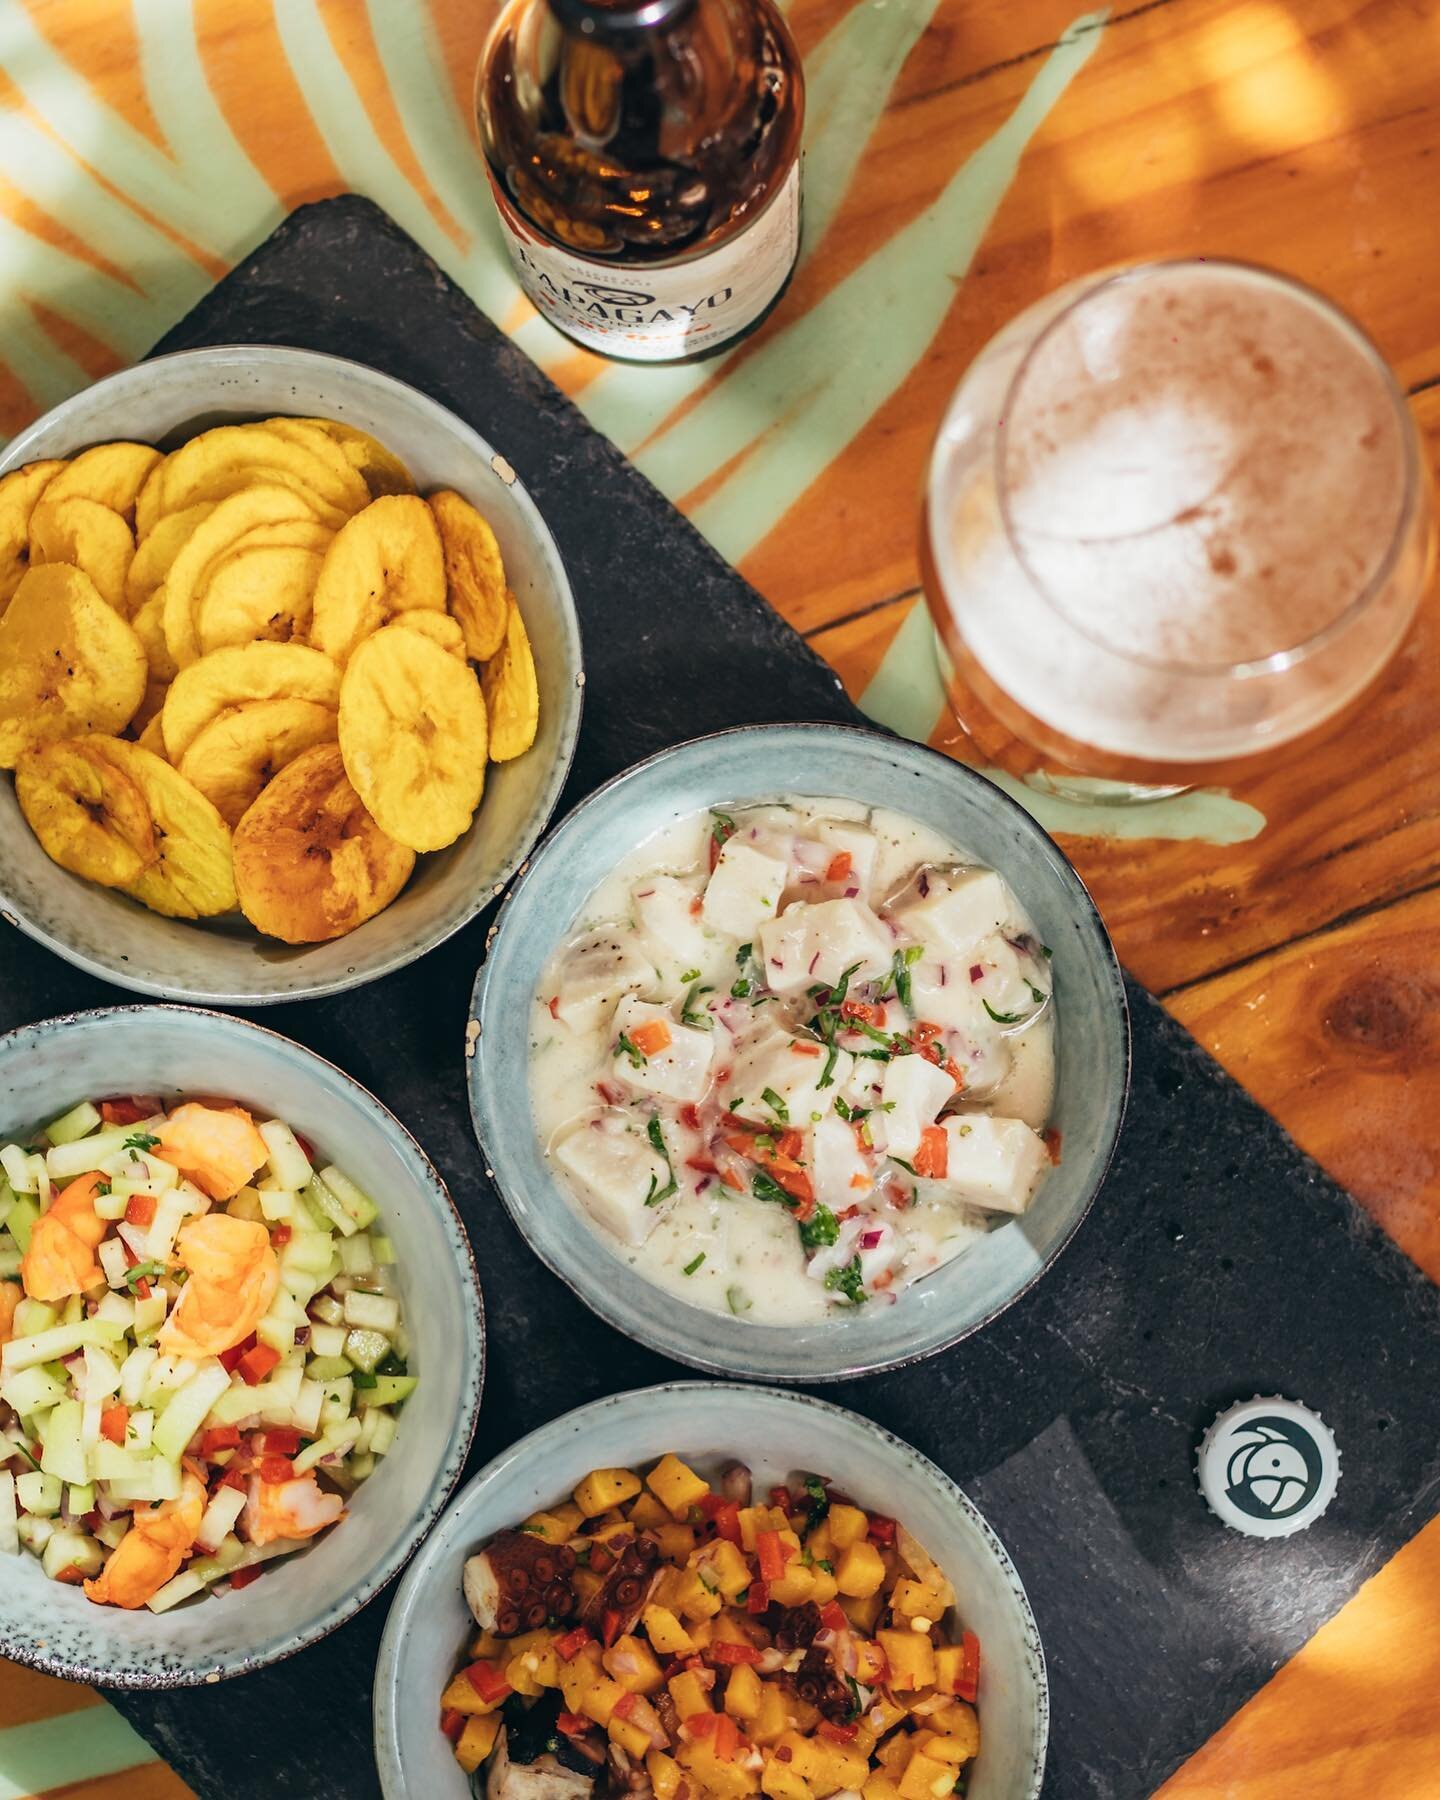 Our Sour Gose is an excellent pair with ceviche and other fresh local seafood dishes. Perfect for hot afternoons at the playa 🐟 🏝 🦐 🍺 🦜 
@picobistrotama @americalatente 

#papagayobrewing #craftbeer #costarica #cervezaartesanal #cerveza #birra #